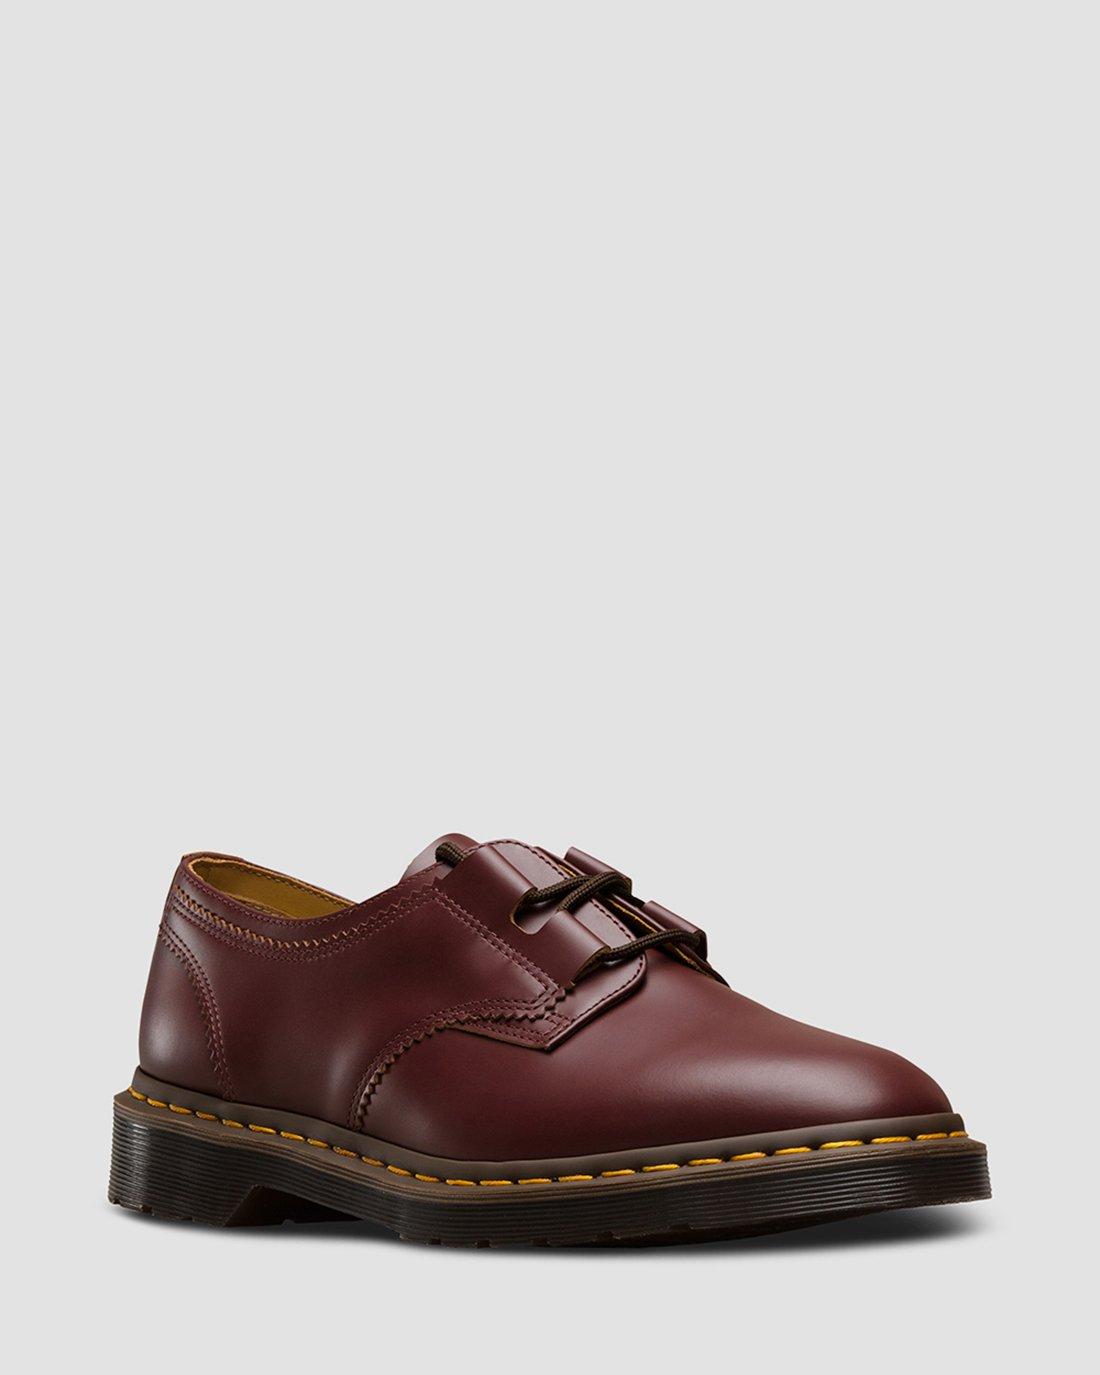 DR MARTENS 1461 GHILLIE LEATHER SHOES